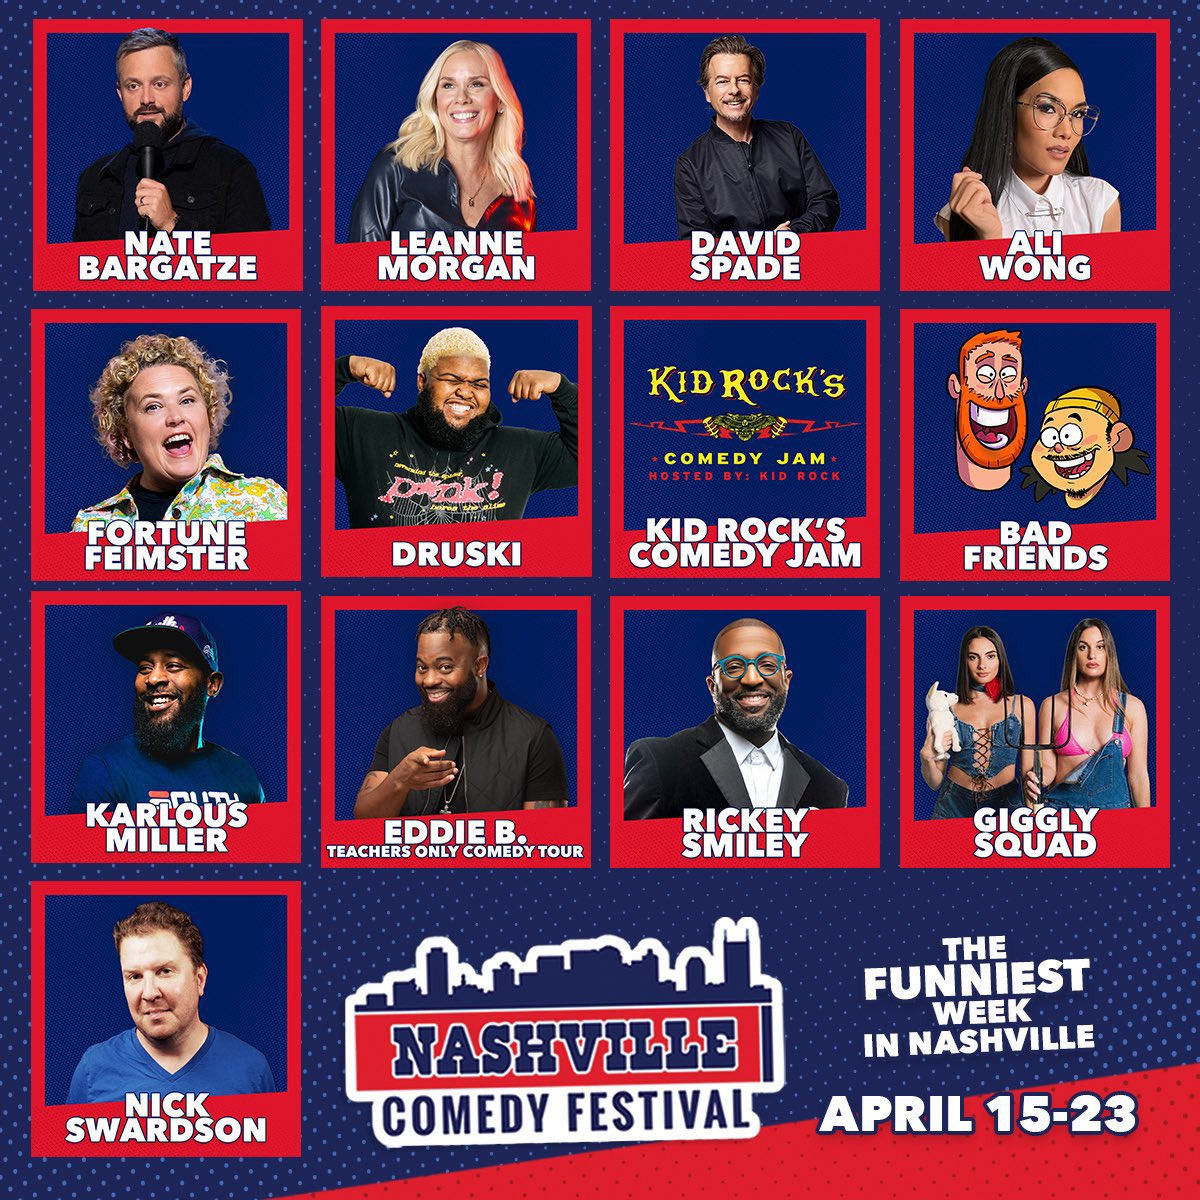 The funniest week in Nashville begins tomorrow!  Looking forward to seeing @natebargatze, @DavidSpade, @LeanneComedy and @FortuneFeimster during @NashComedyFest!